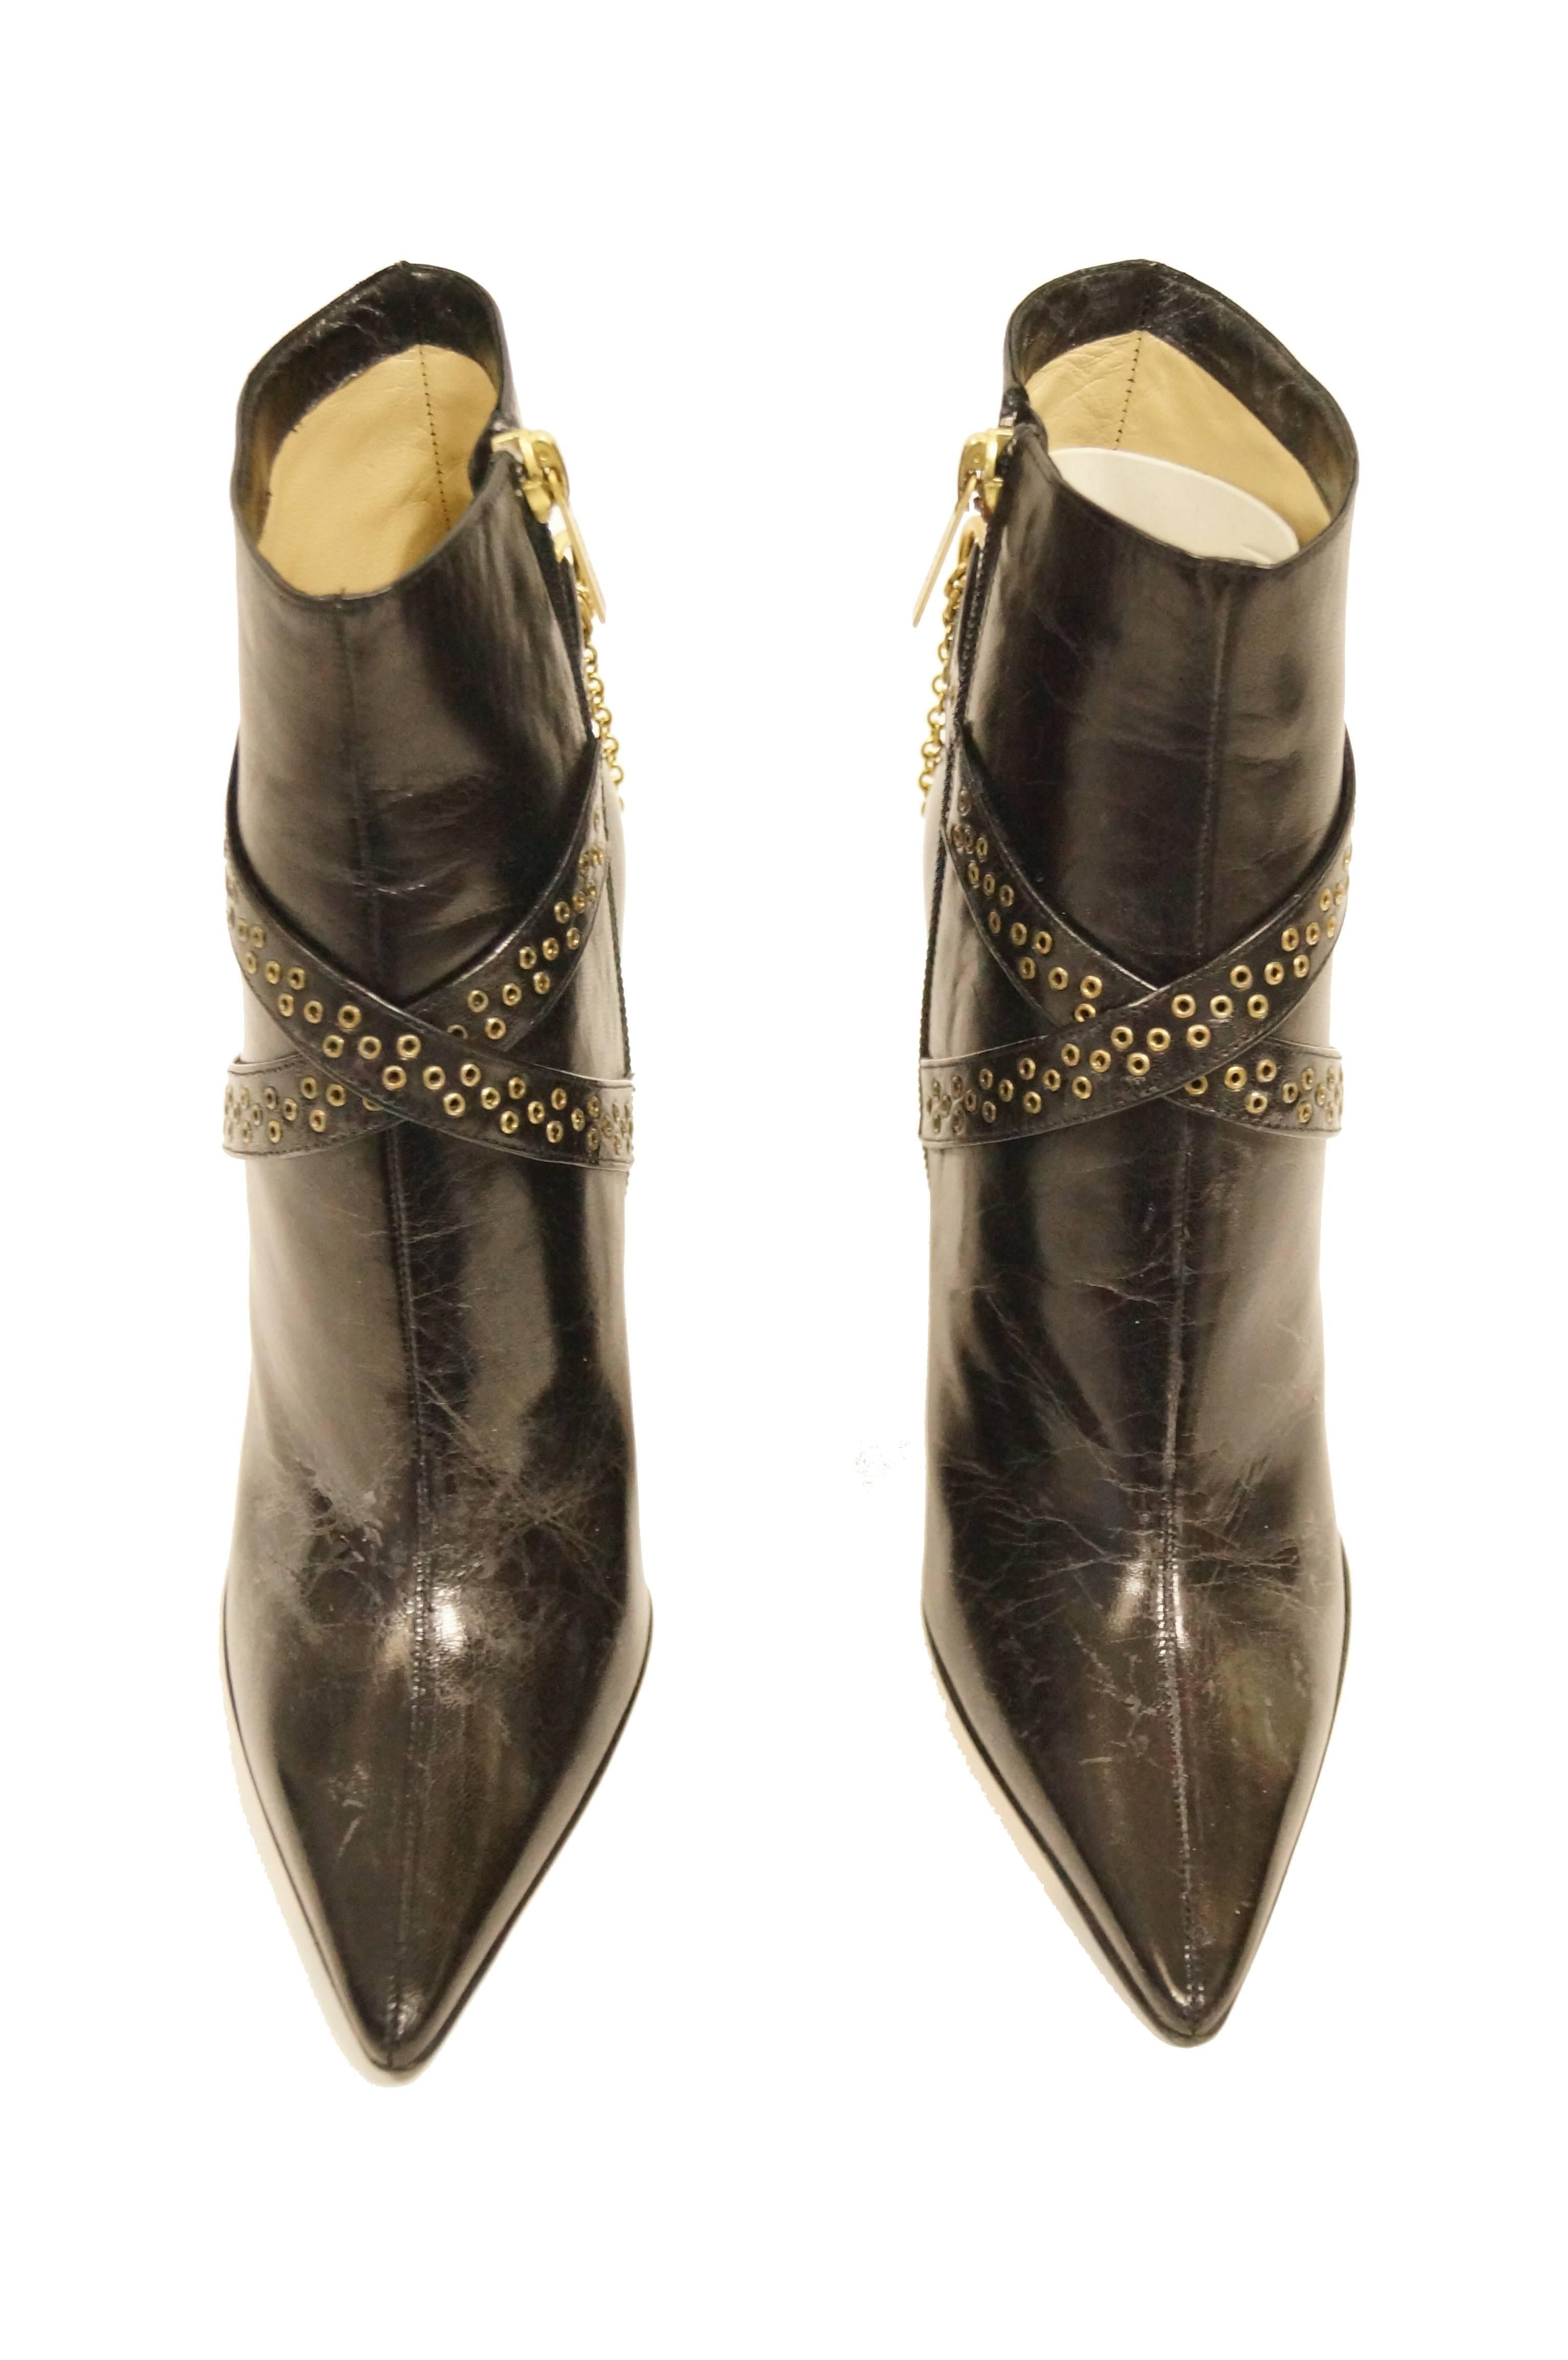 Polished and Edgy smooth point toe booties by Jimmy Choo. The boots feature a thin 4 inch black leather heel with polka dot rivets throughout. Ankles are adorned with crisscross riveted straps with double layered swinging gold chains. Wide boot